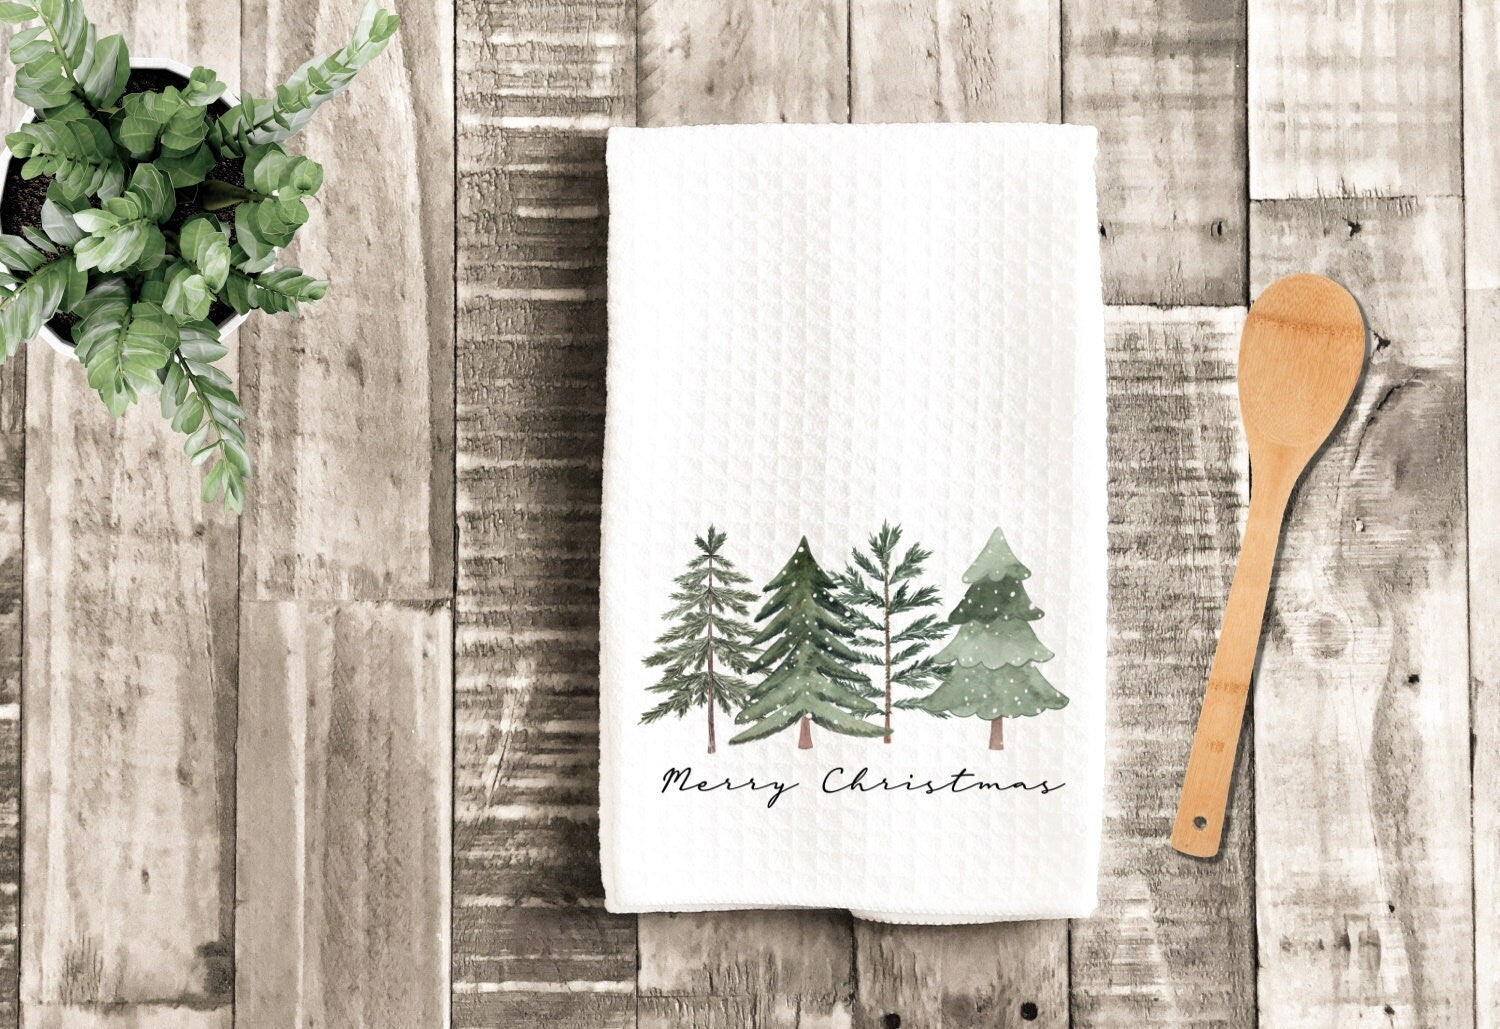 Raggedy Trees with Fabric Tag Tea Towels, Set/2 - The Crafty Decorator